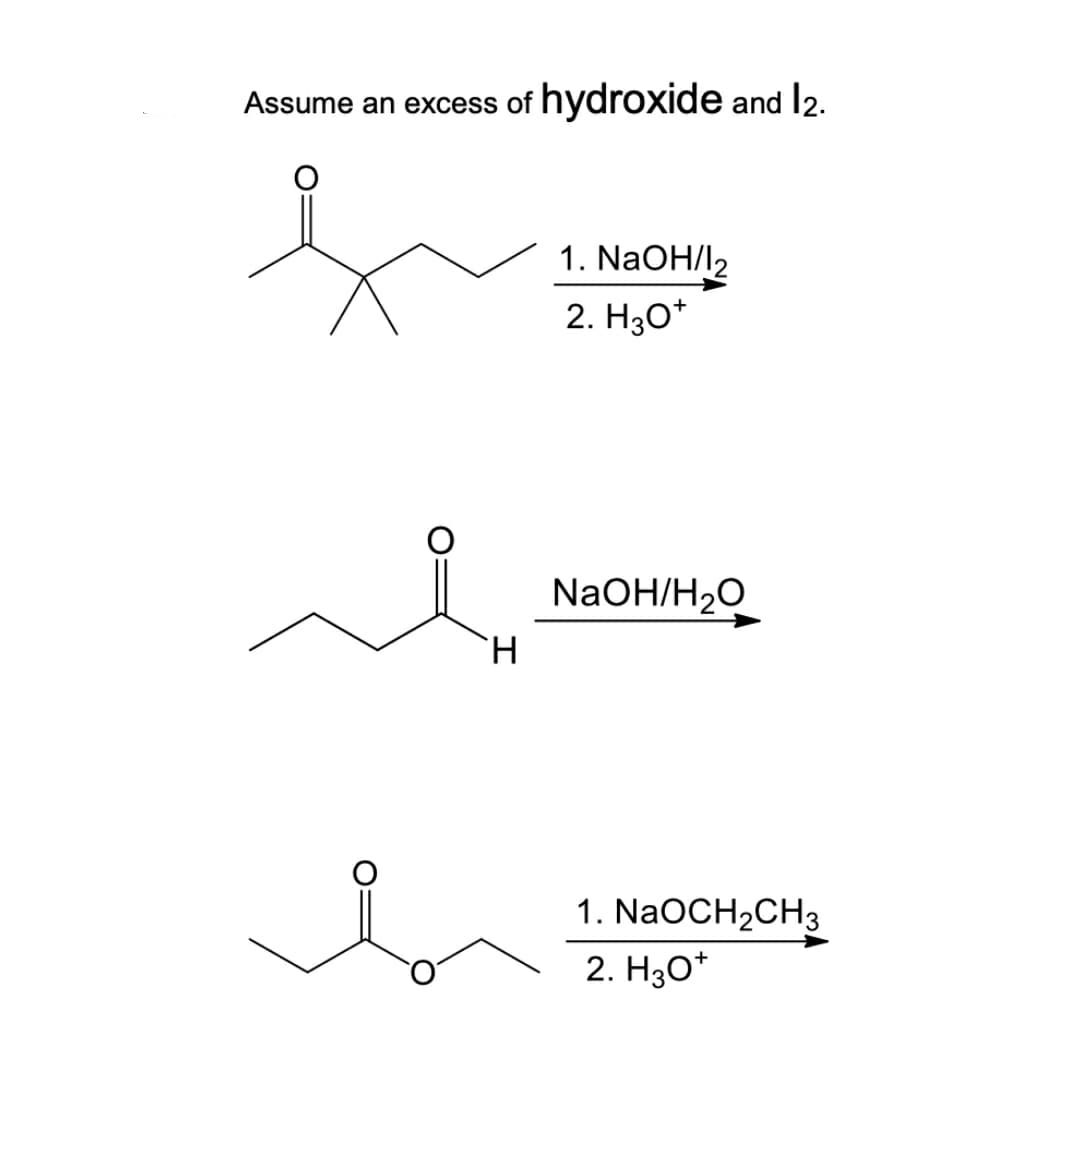 Assume an excess of hydroxide and l2.
1. NaOH/l2
2. H30*
NaOH/H2O
H.
1. NaOCH2CH3
2. H30*
